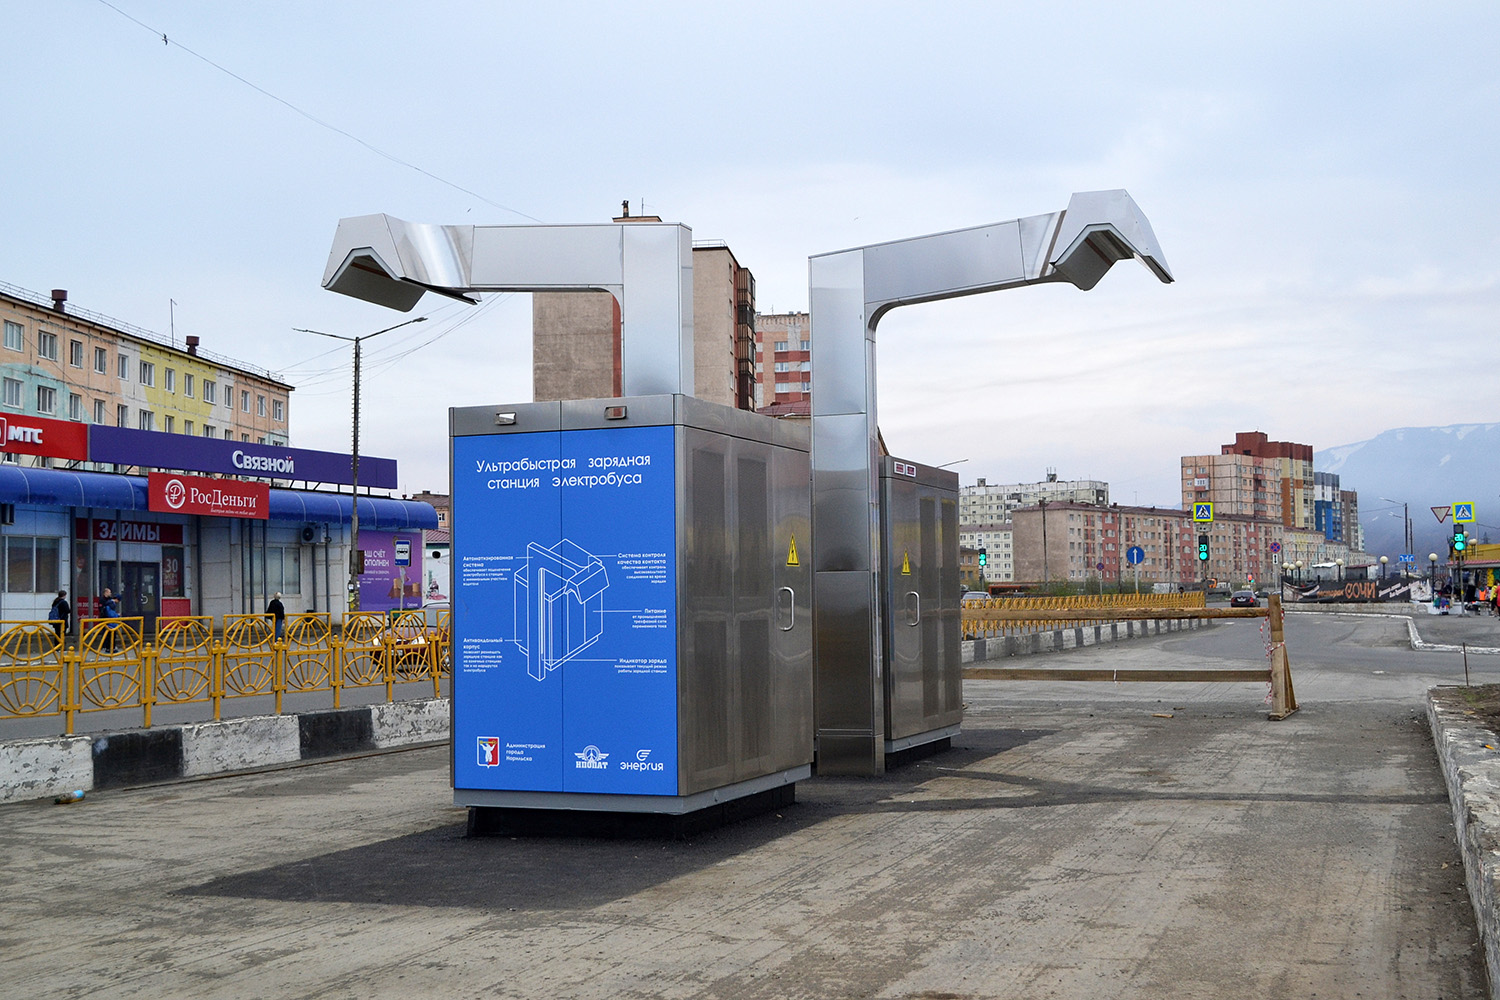 Norilsk — Unrealized Rechargeable Electric Bus Project (2022)